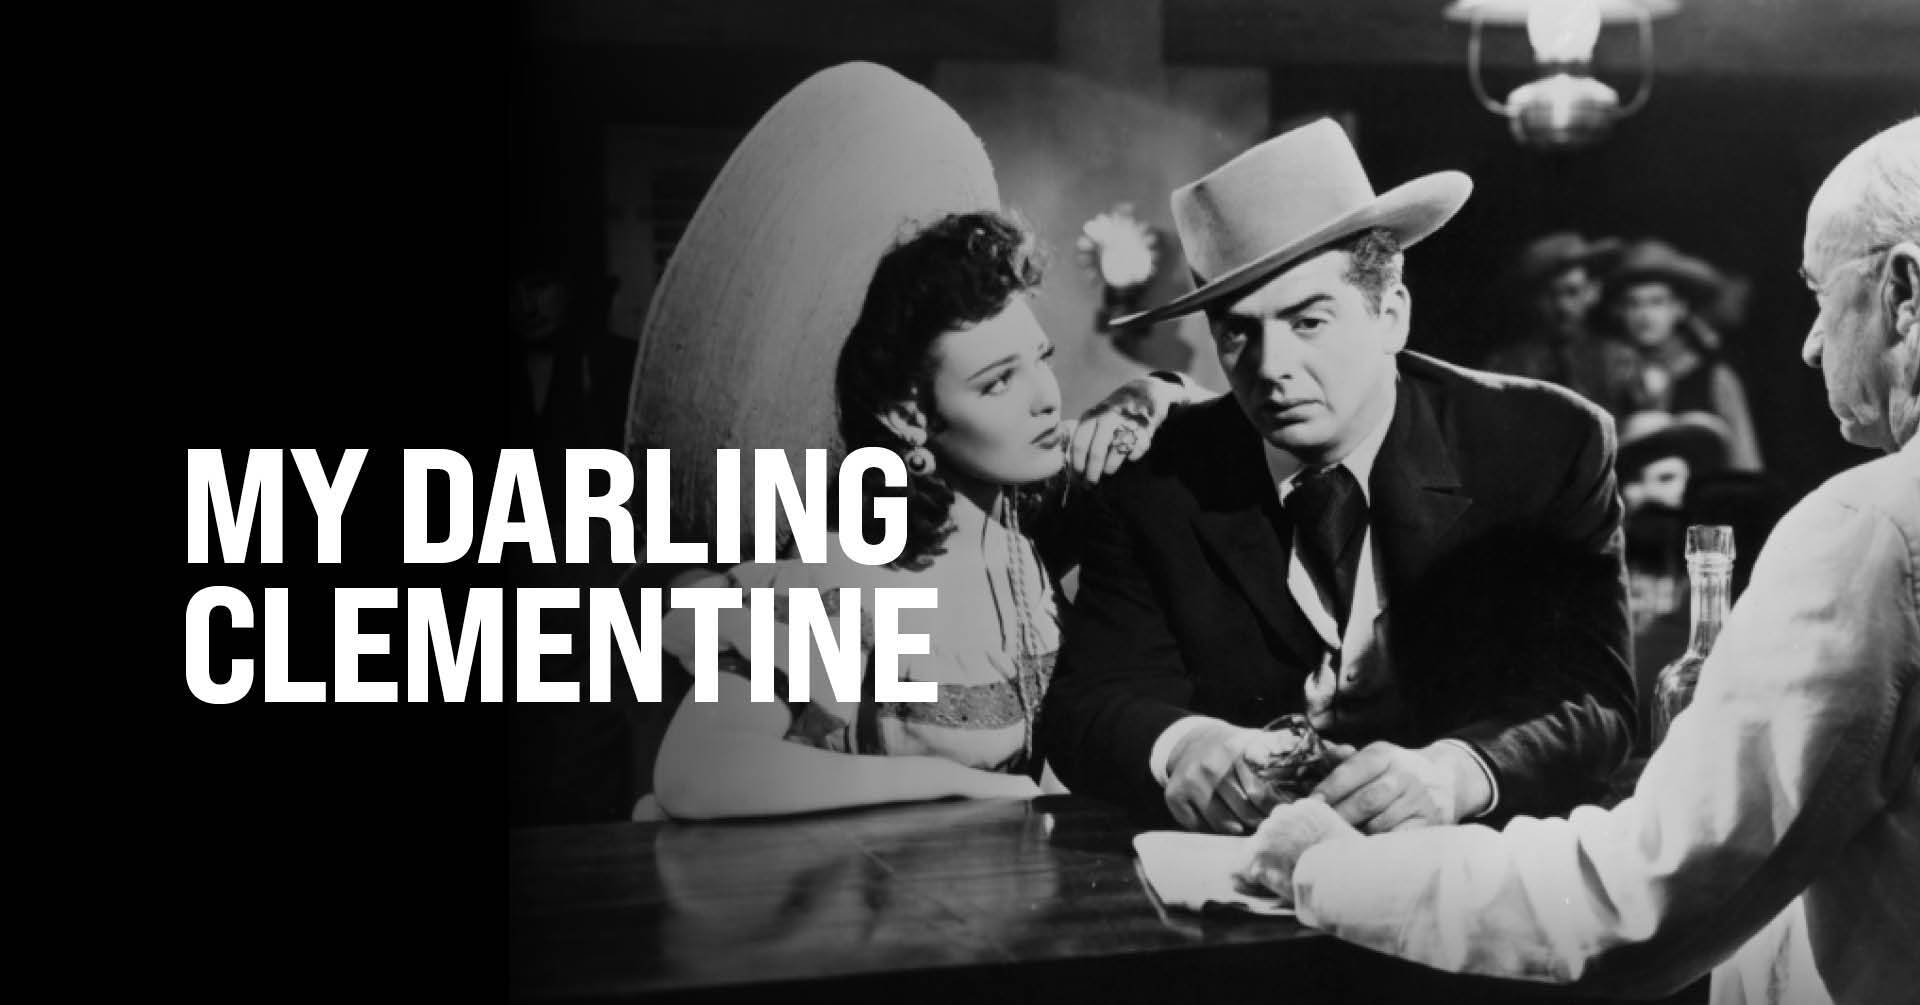 42-facts-about-the-movie-my-darling-clementine